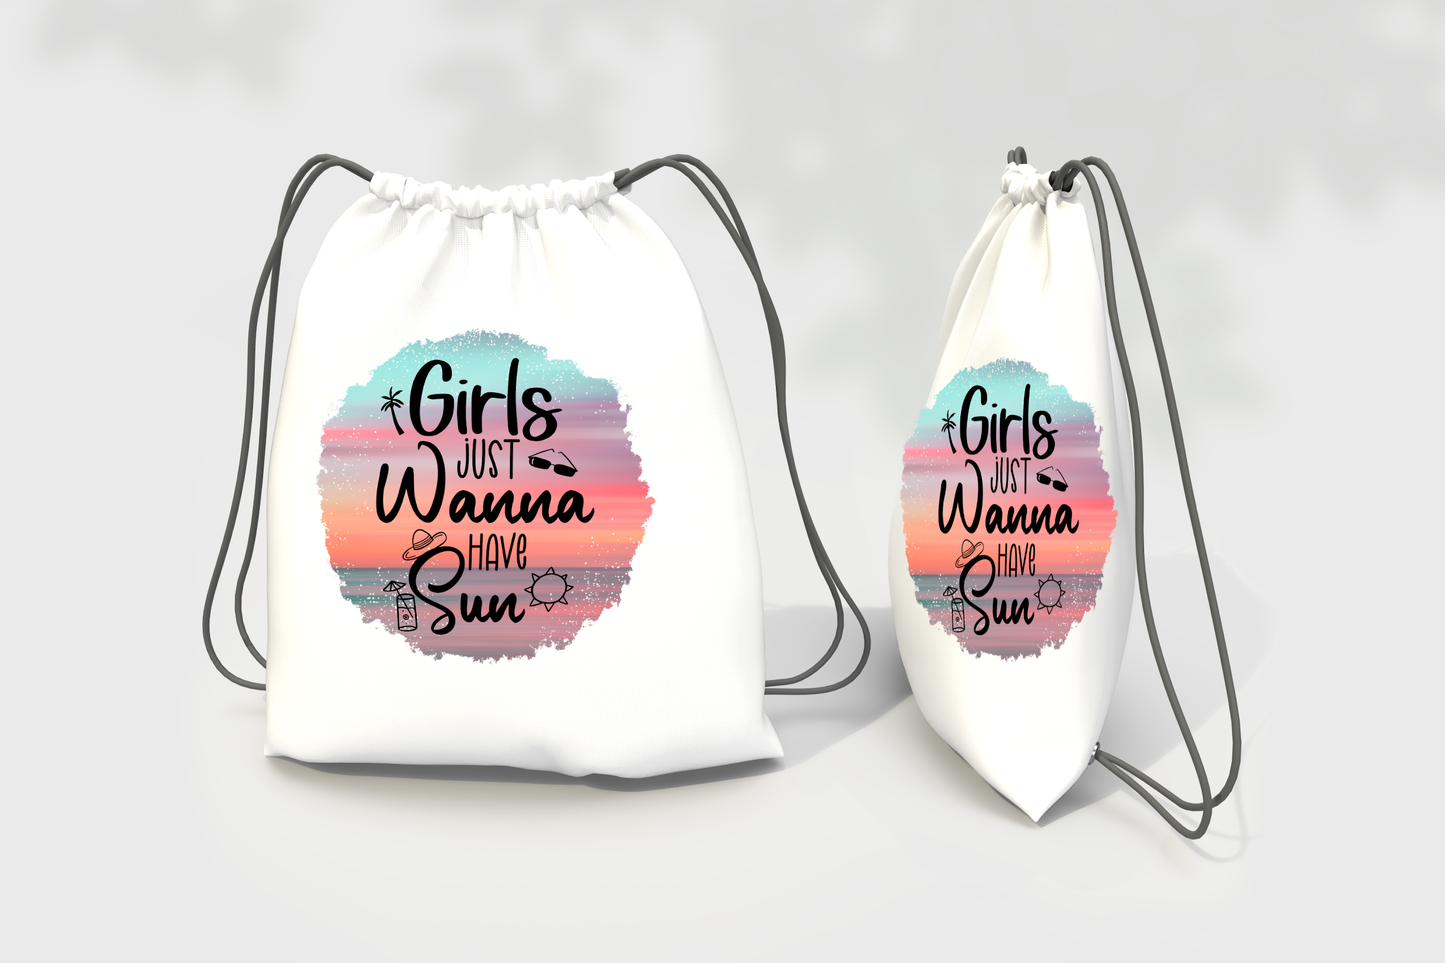 Girls Just Wanna Have Sun Backpack Canvas Bag